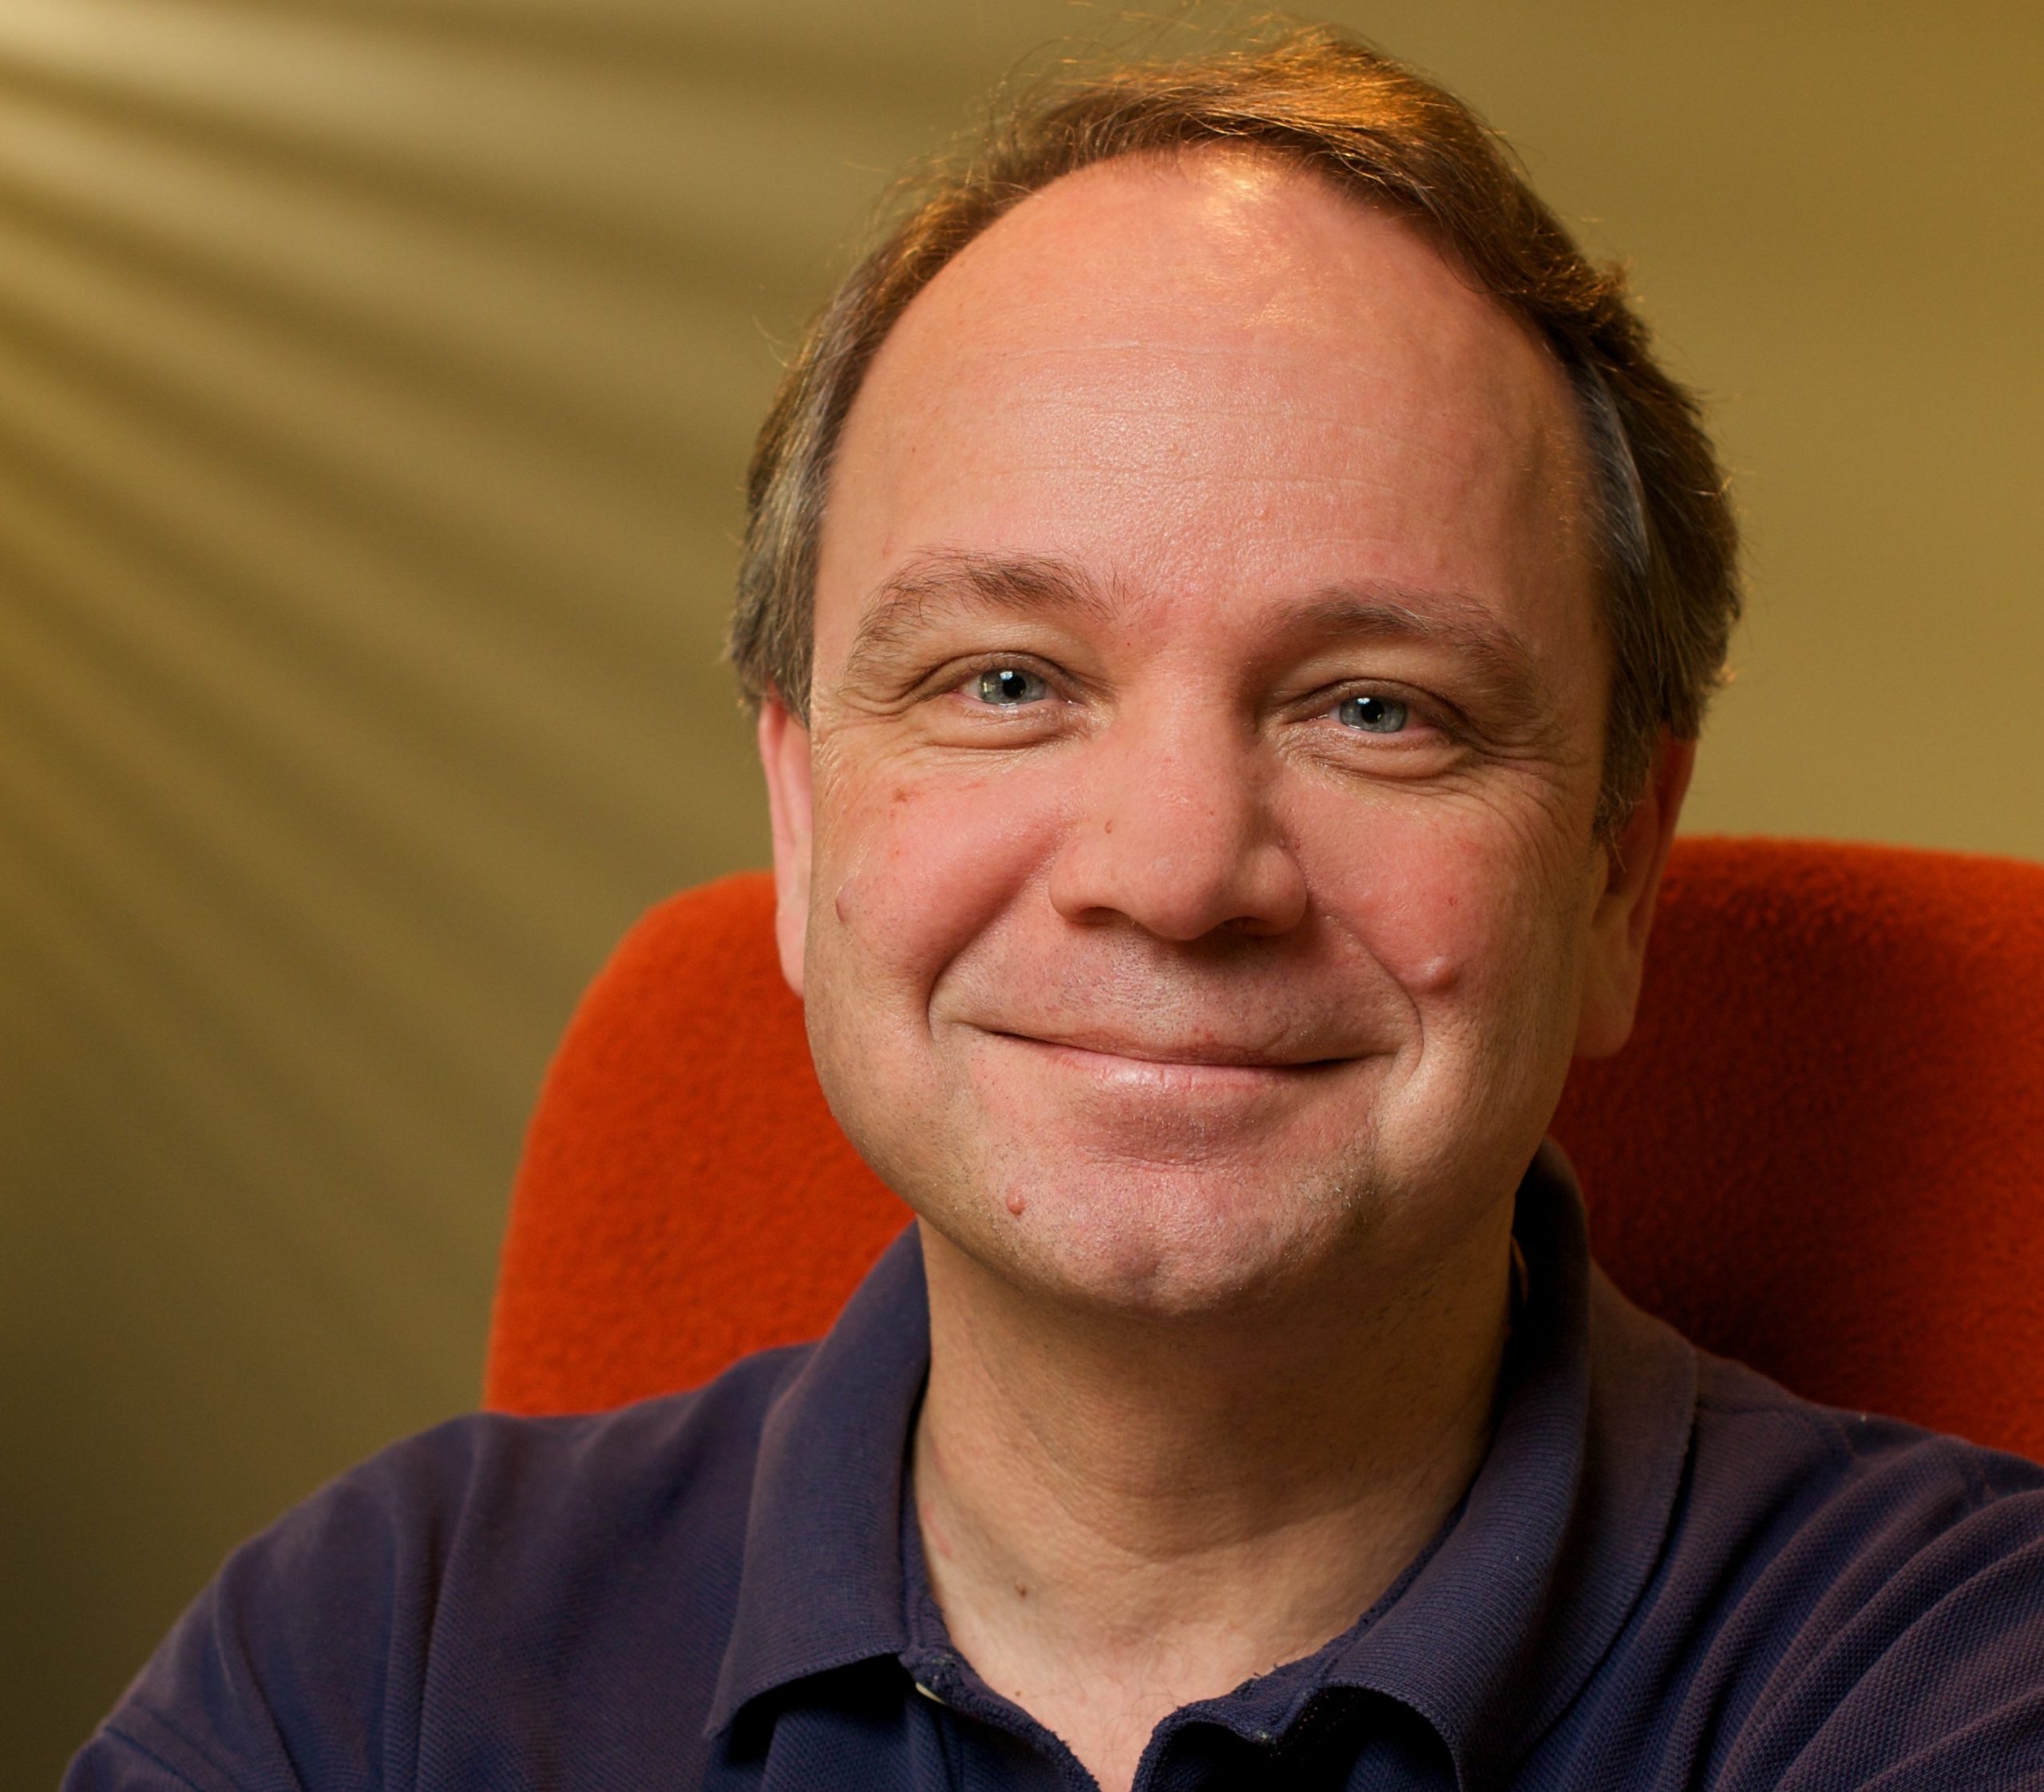 Sid Meier: 'There’s a whole new generation of gamers who’ve grown up knowing games their entire life'